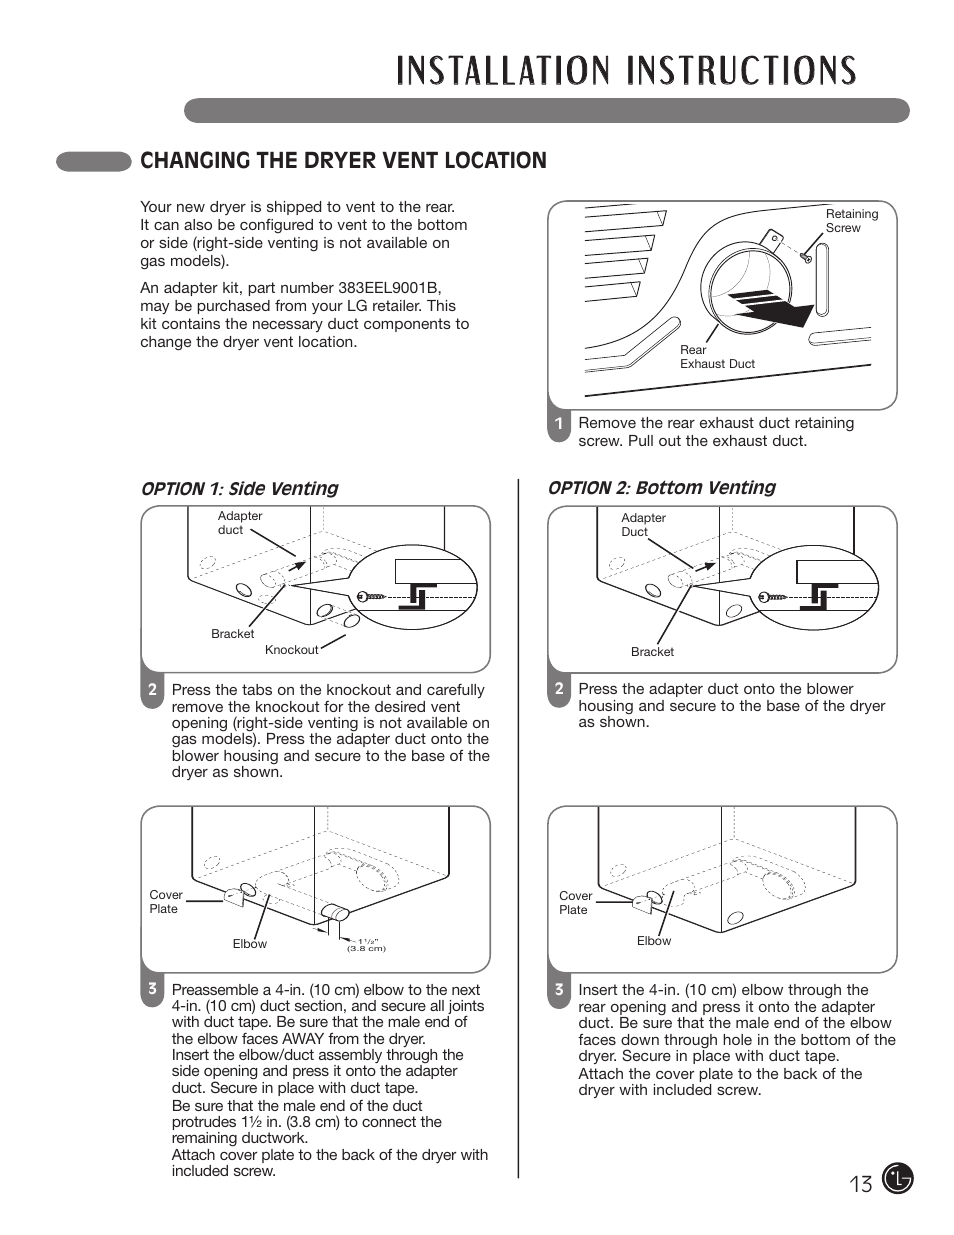 Changing the dryer vent location | LG D5966W User Manual | Page 13 / 80